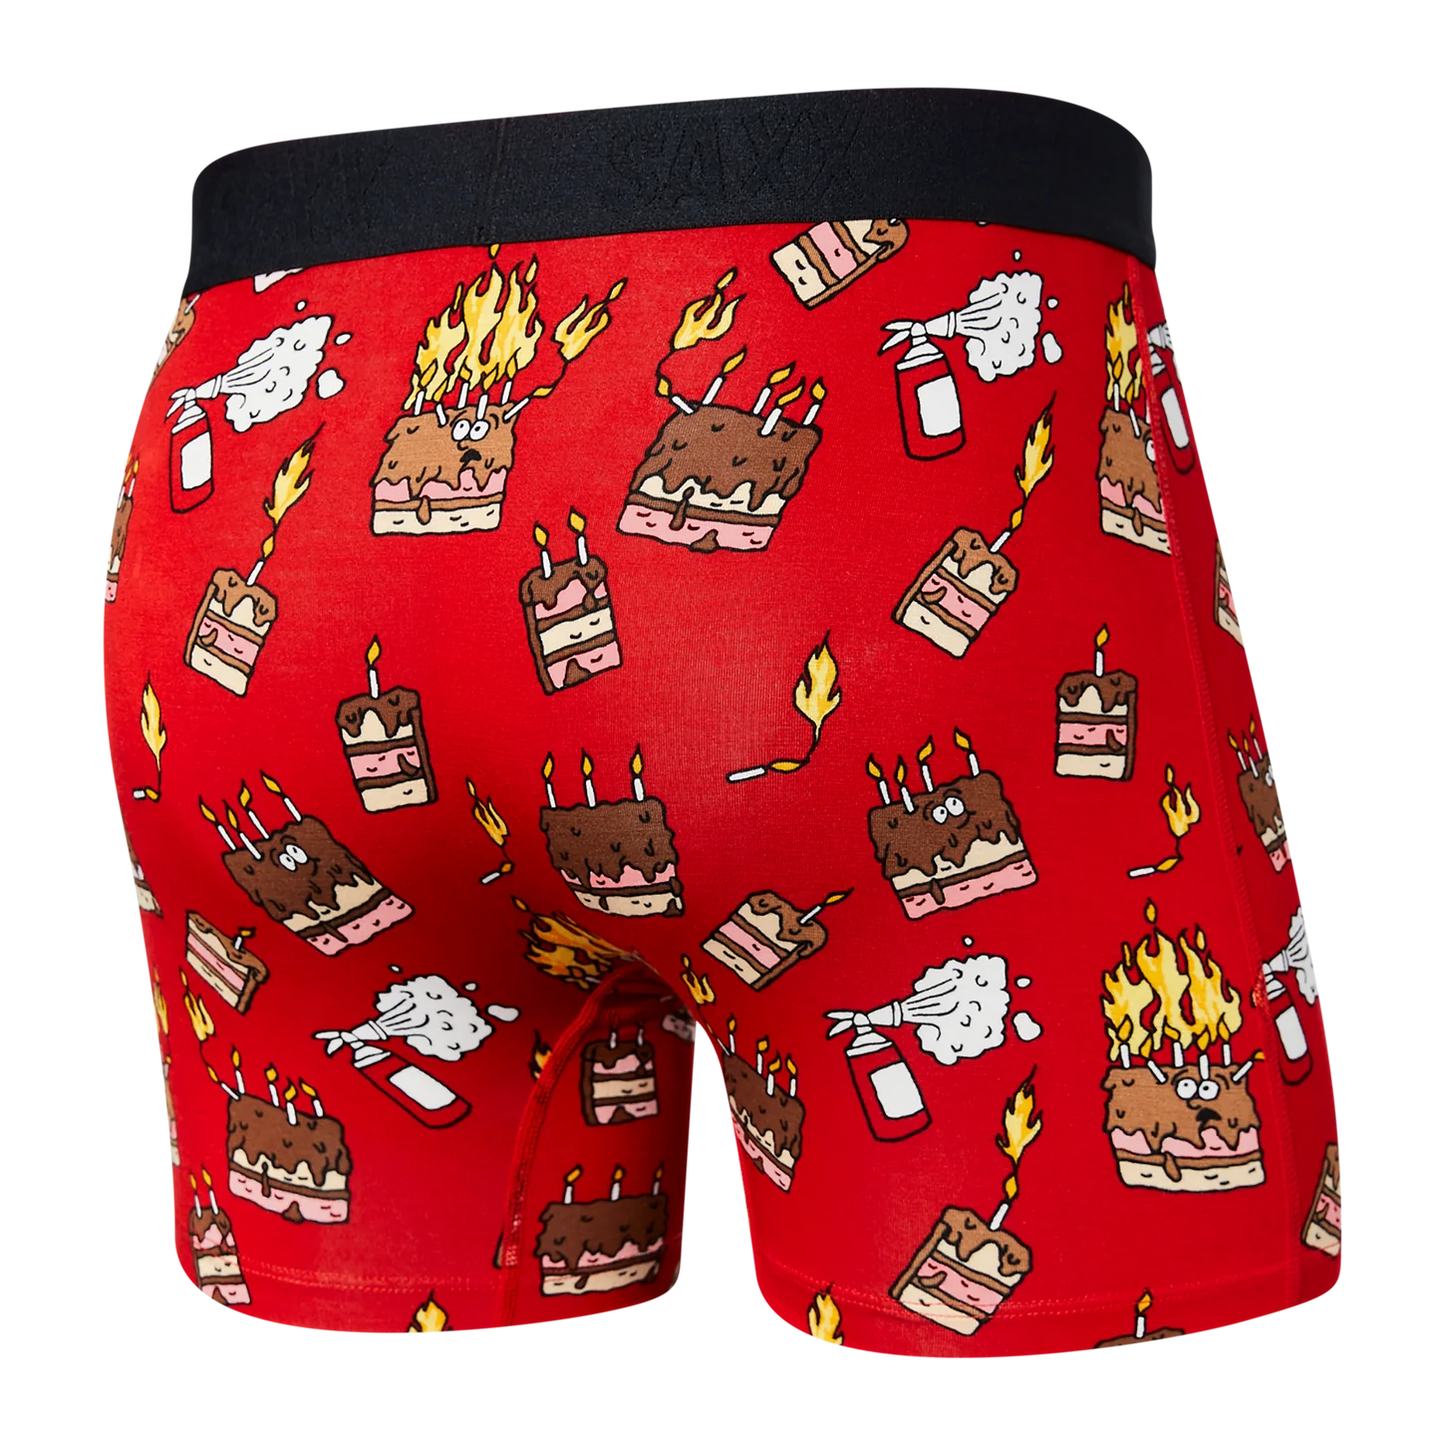 VIBE SUPER SOFT Boxer Brief / Fired Up- Red